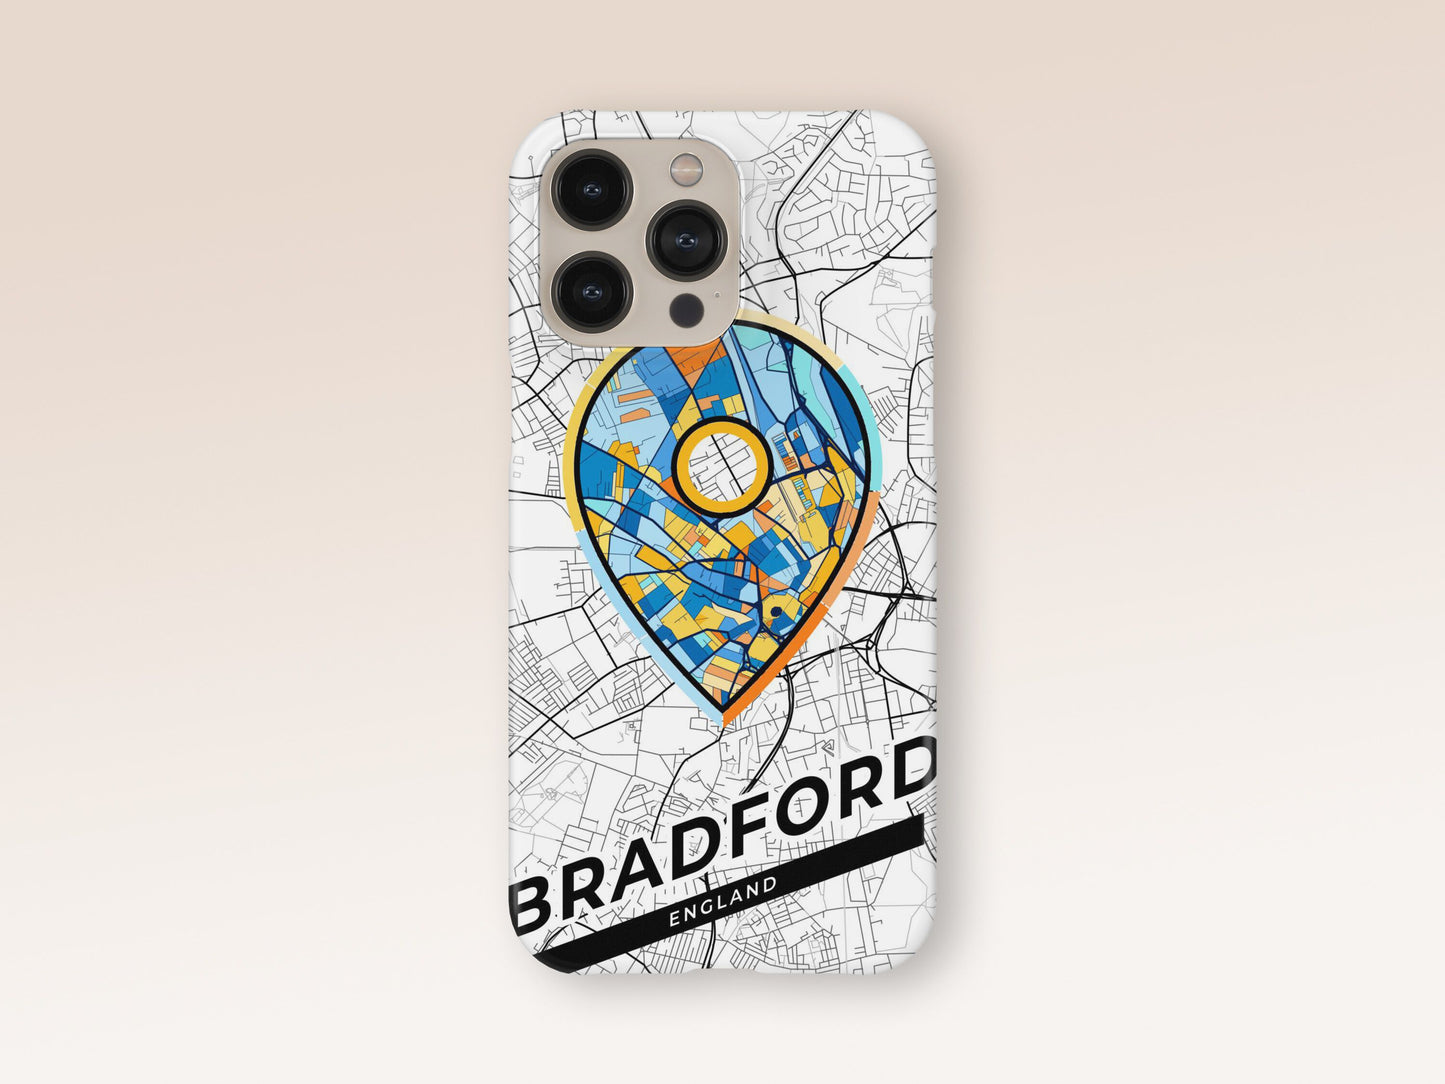 Bradford England slim phone case with colorful icon. Birthday, wedding or housewarming gift. Couple match cases. 1